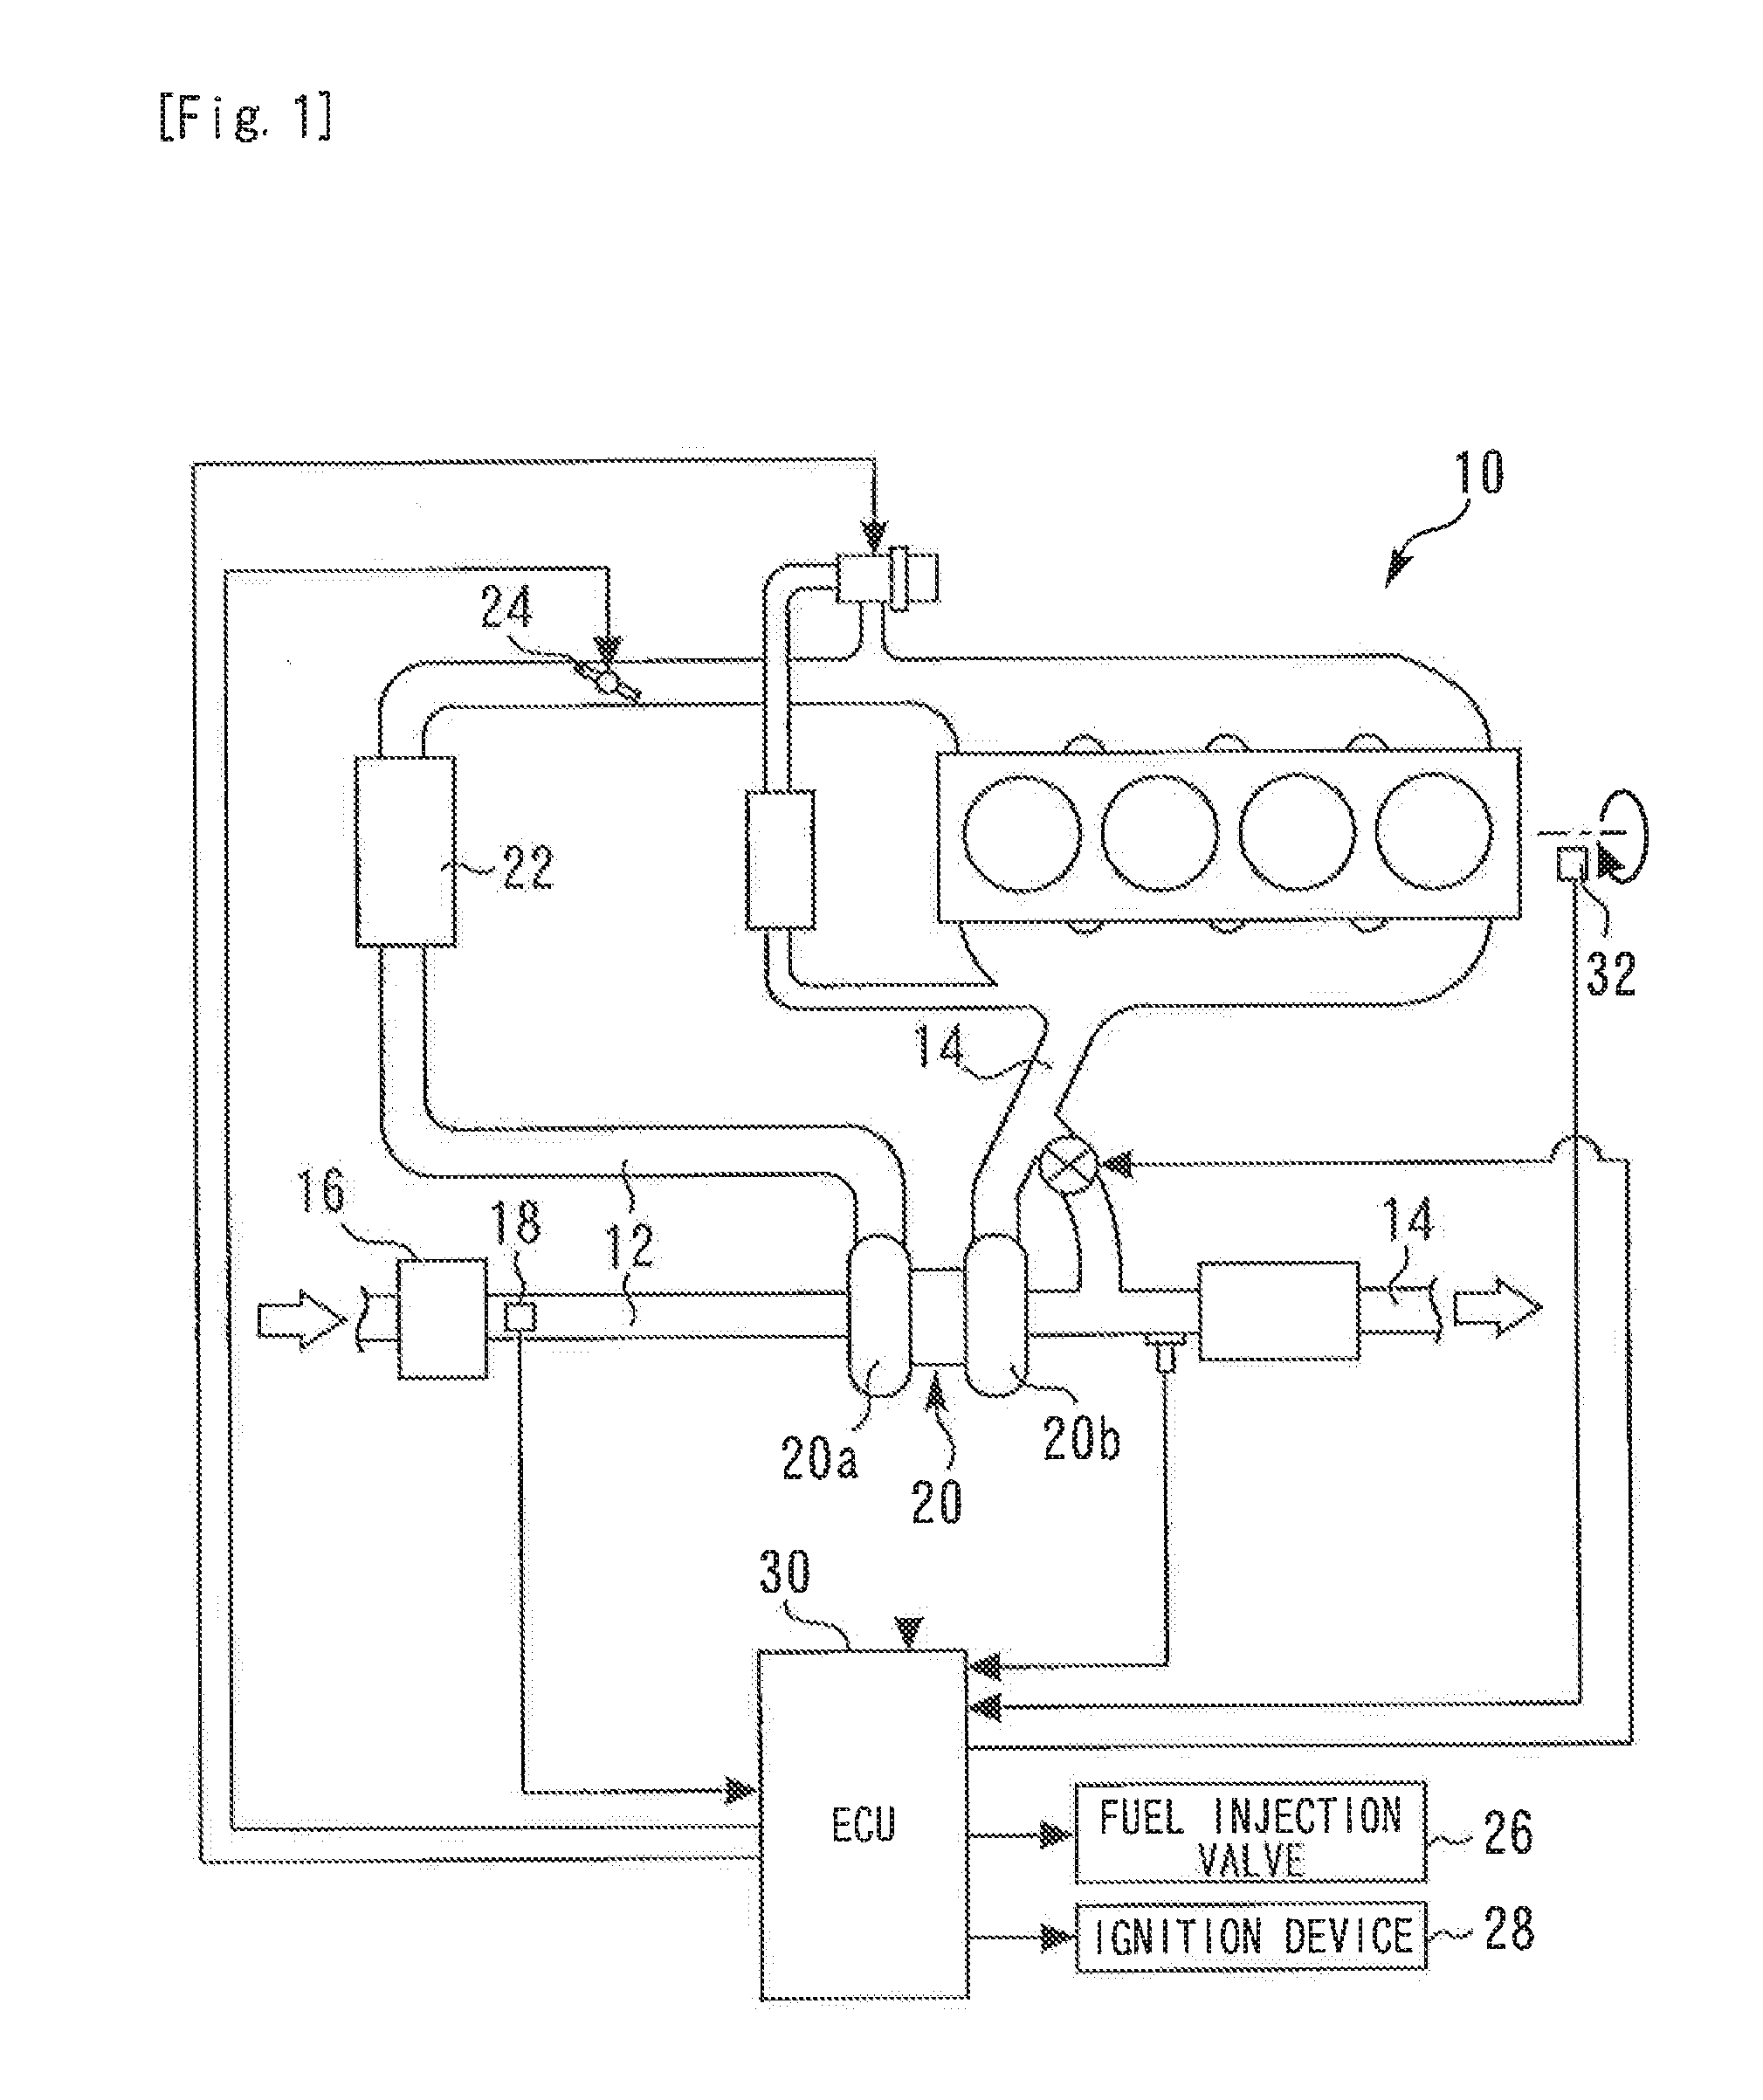 Ignition control apparatus for internal combustion engine (as amended)